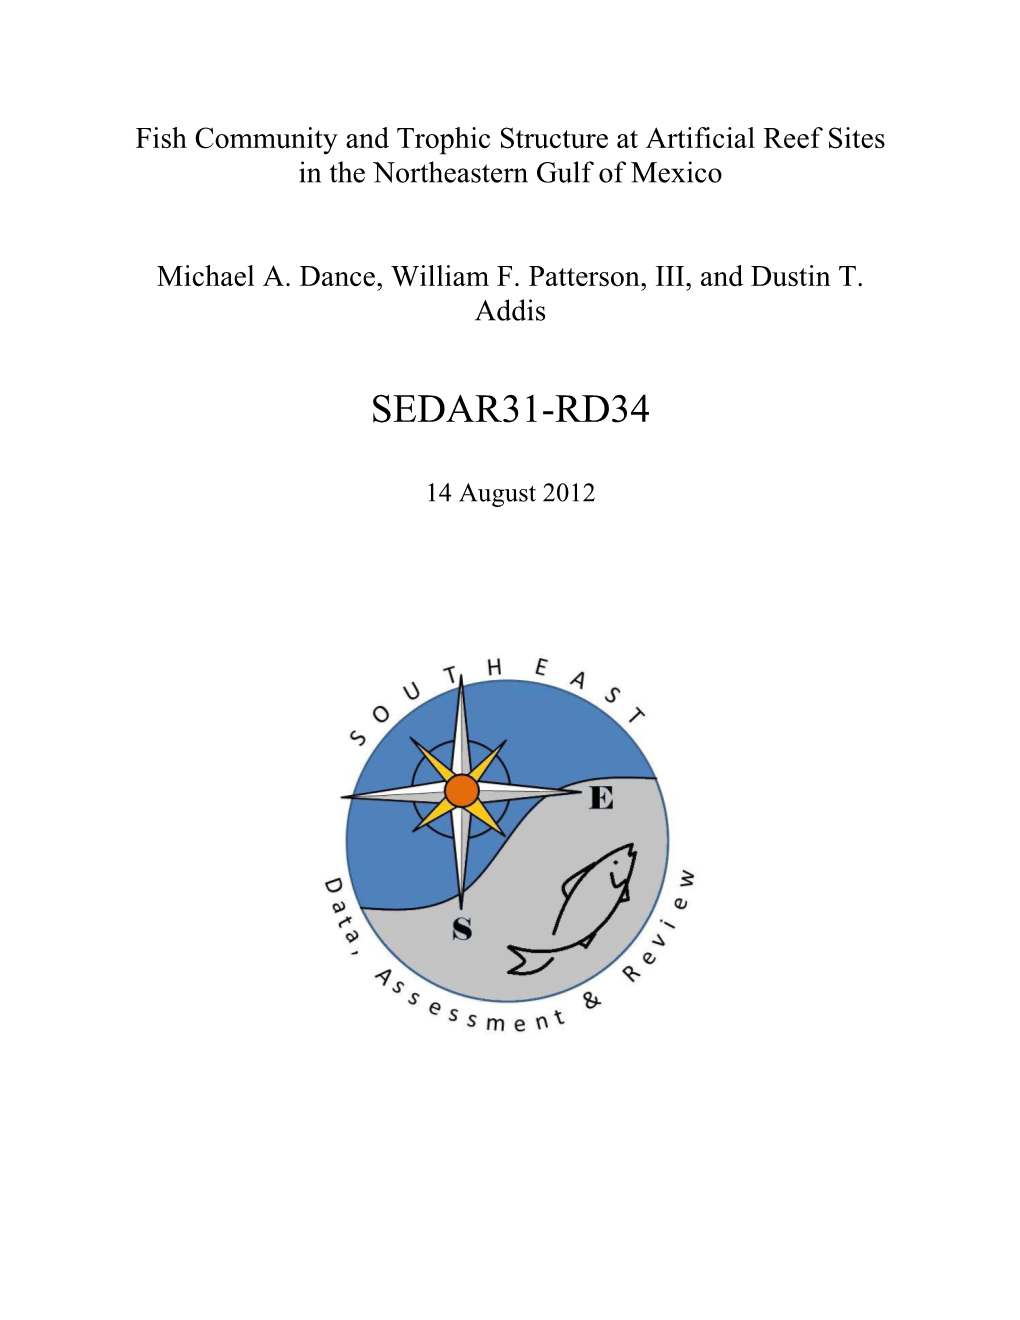 SEDAR31-RD34-BMS Artificial Reef Community and Trophic Structure.Pdf